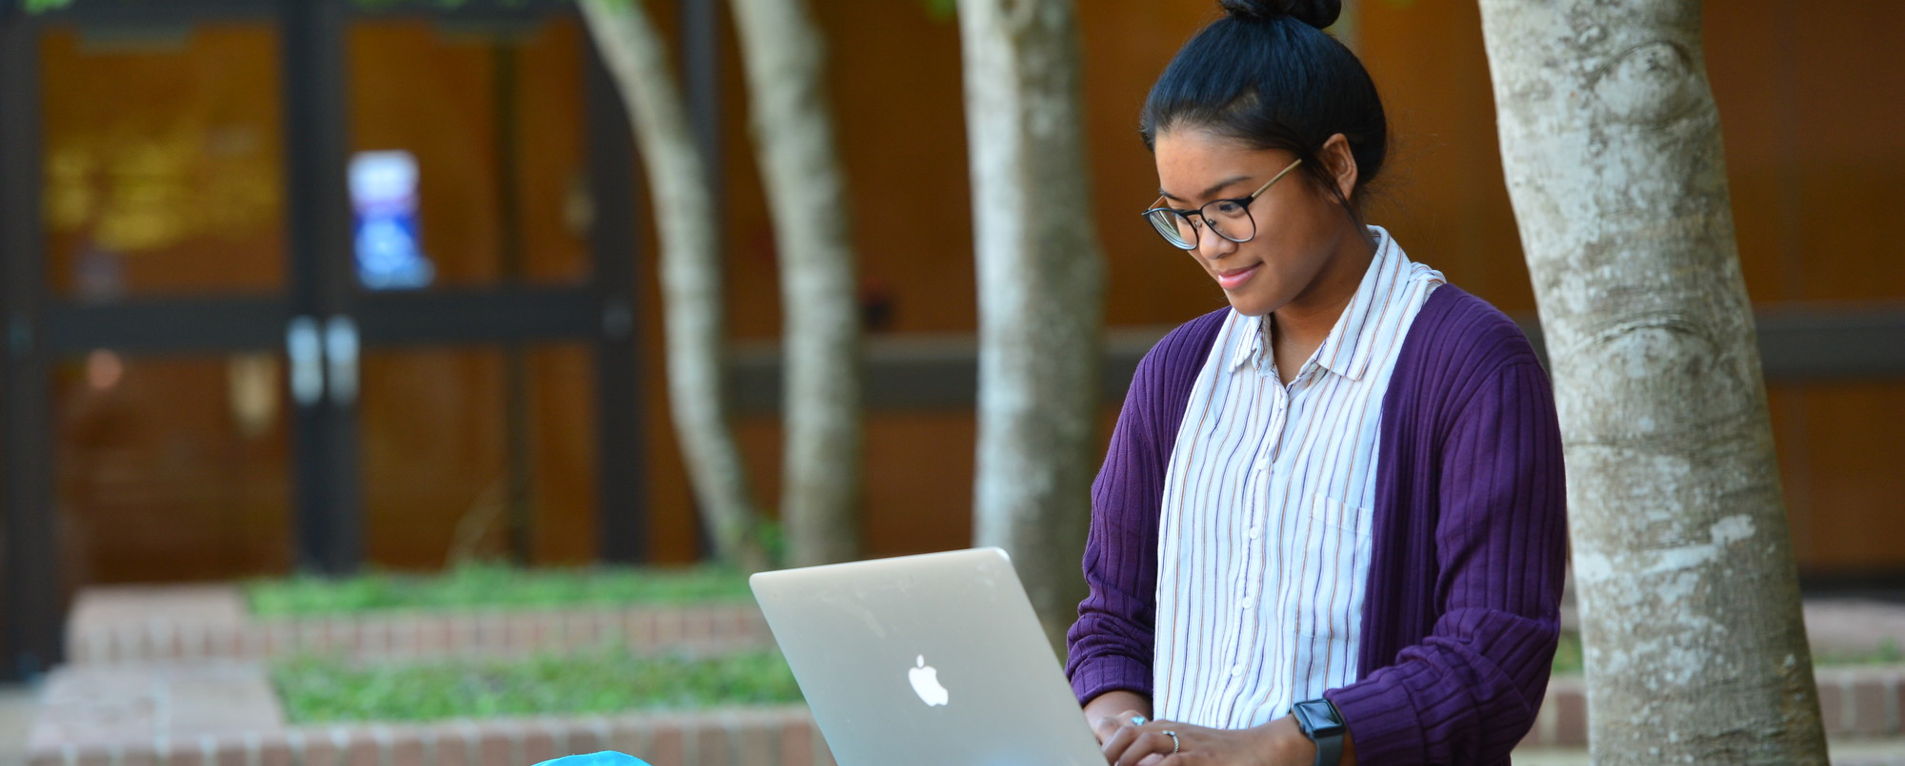 a student engages in studies using a laptop